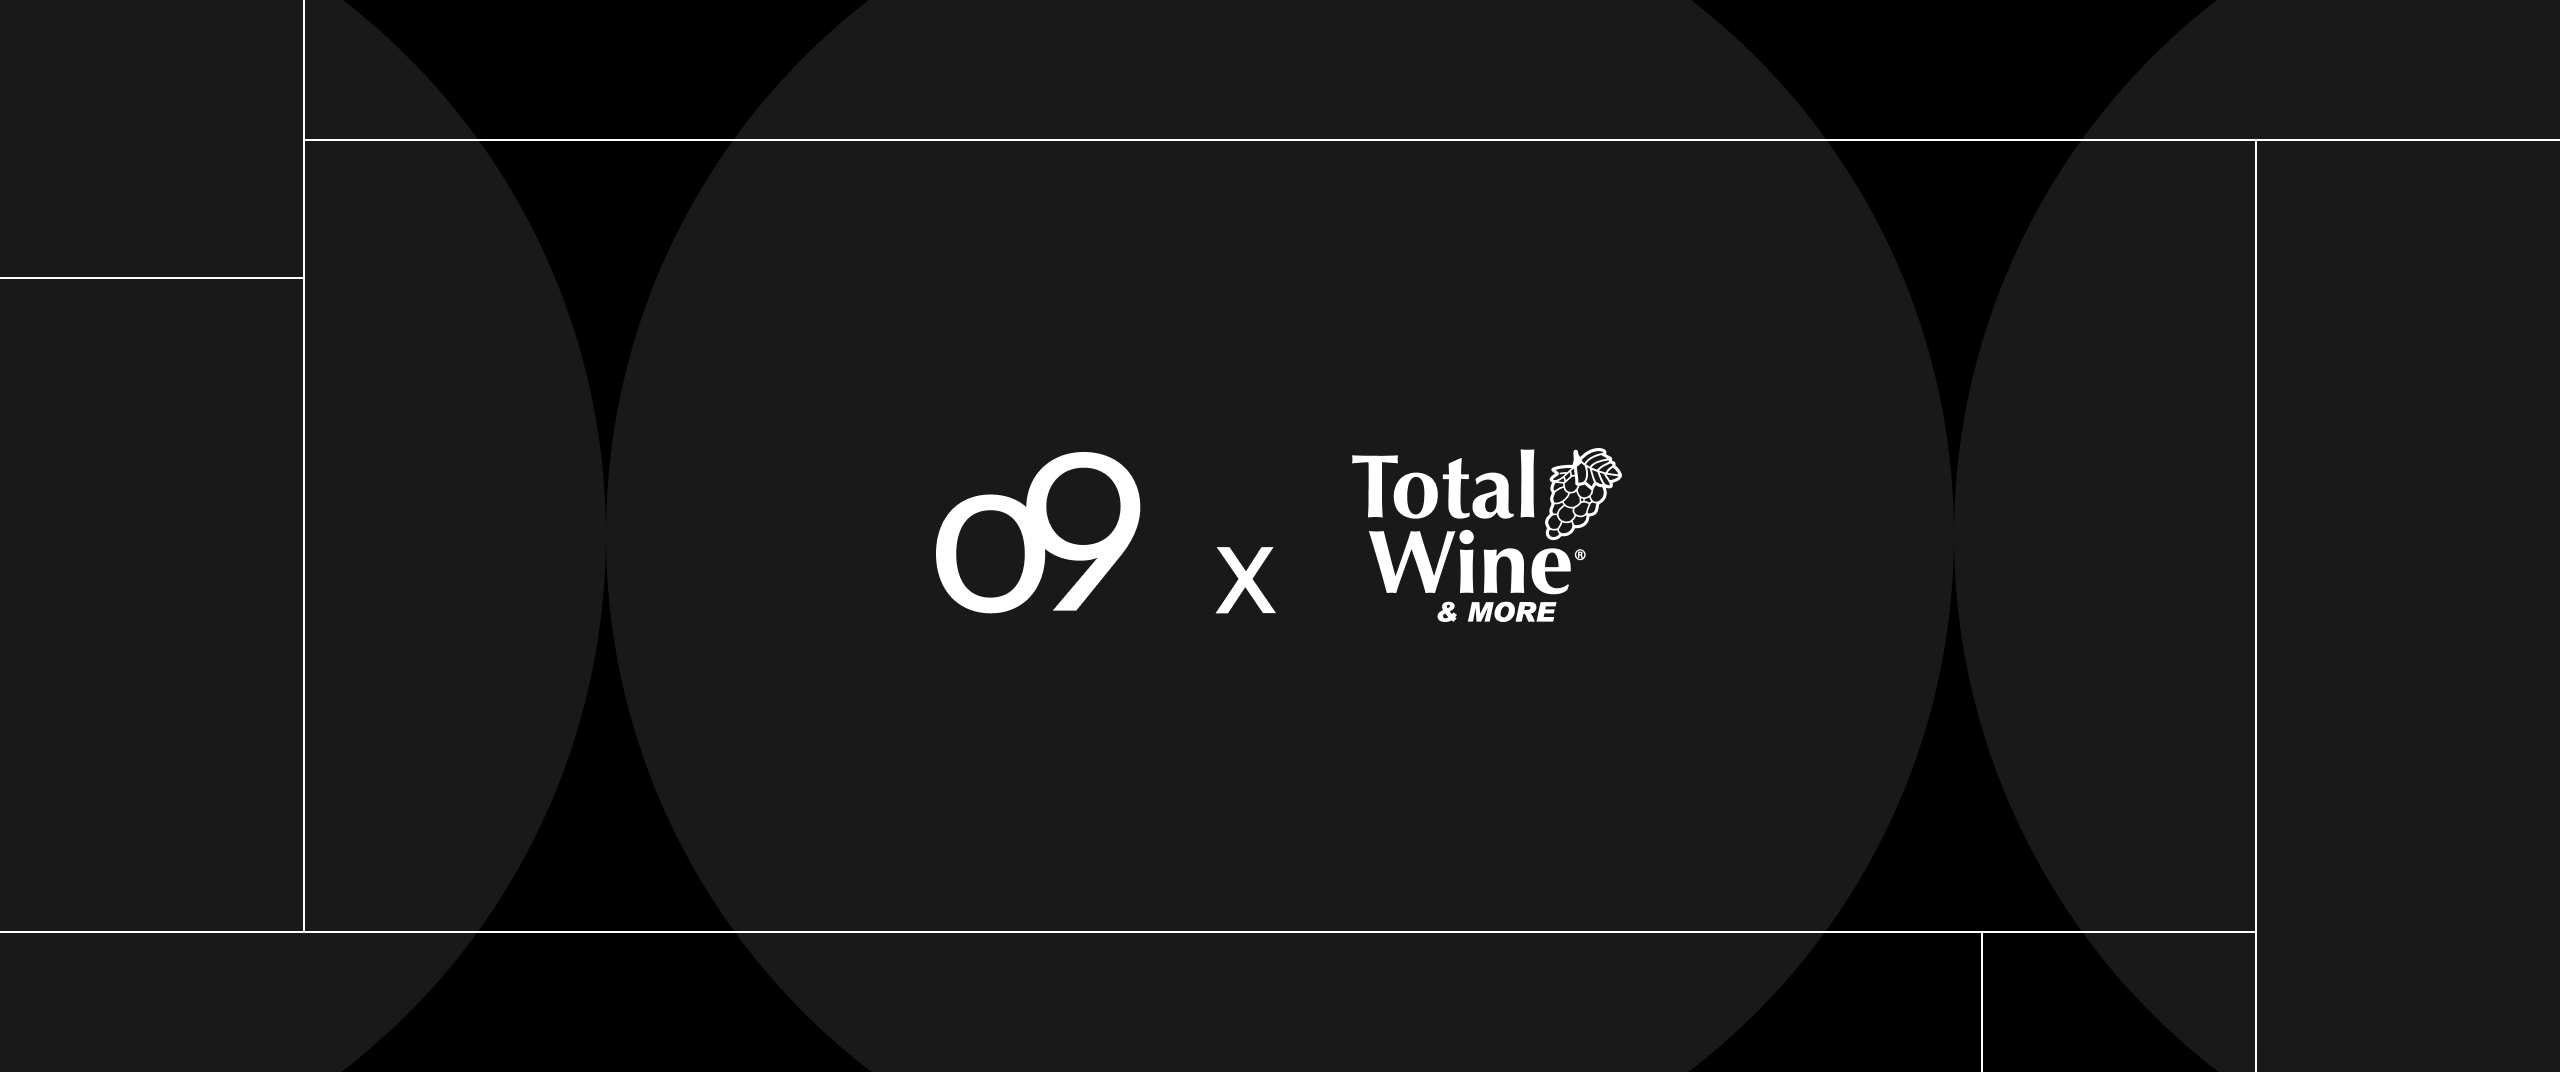 Total Wine & More Selects o9 Solutions as Its Omnichannel Retail Planning Platform Partner